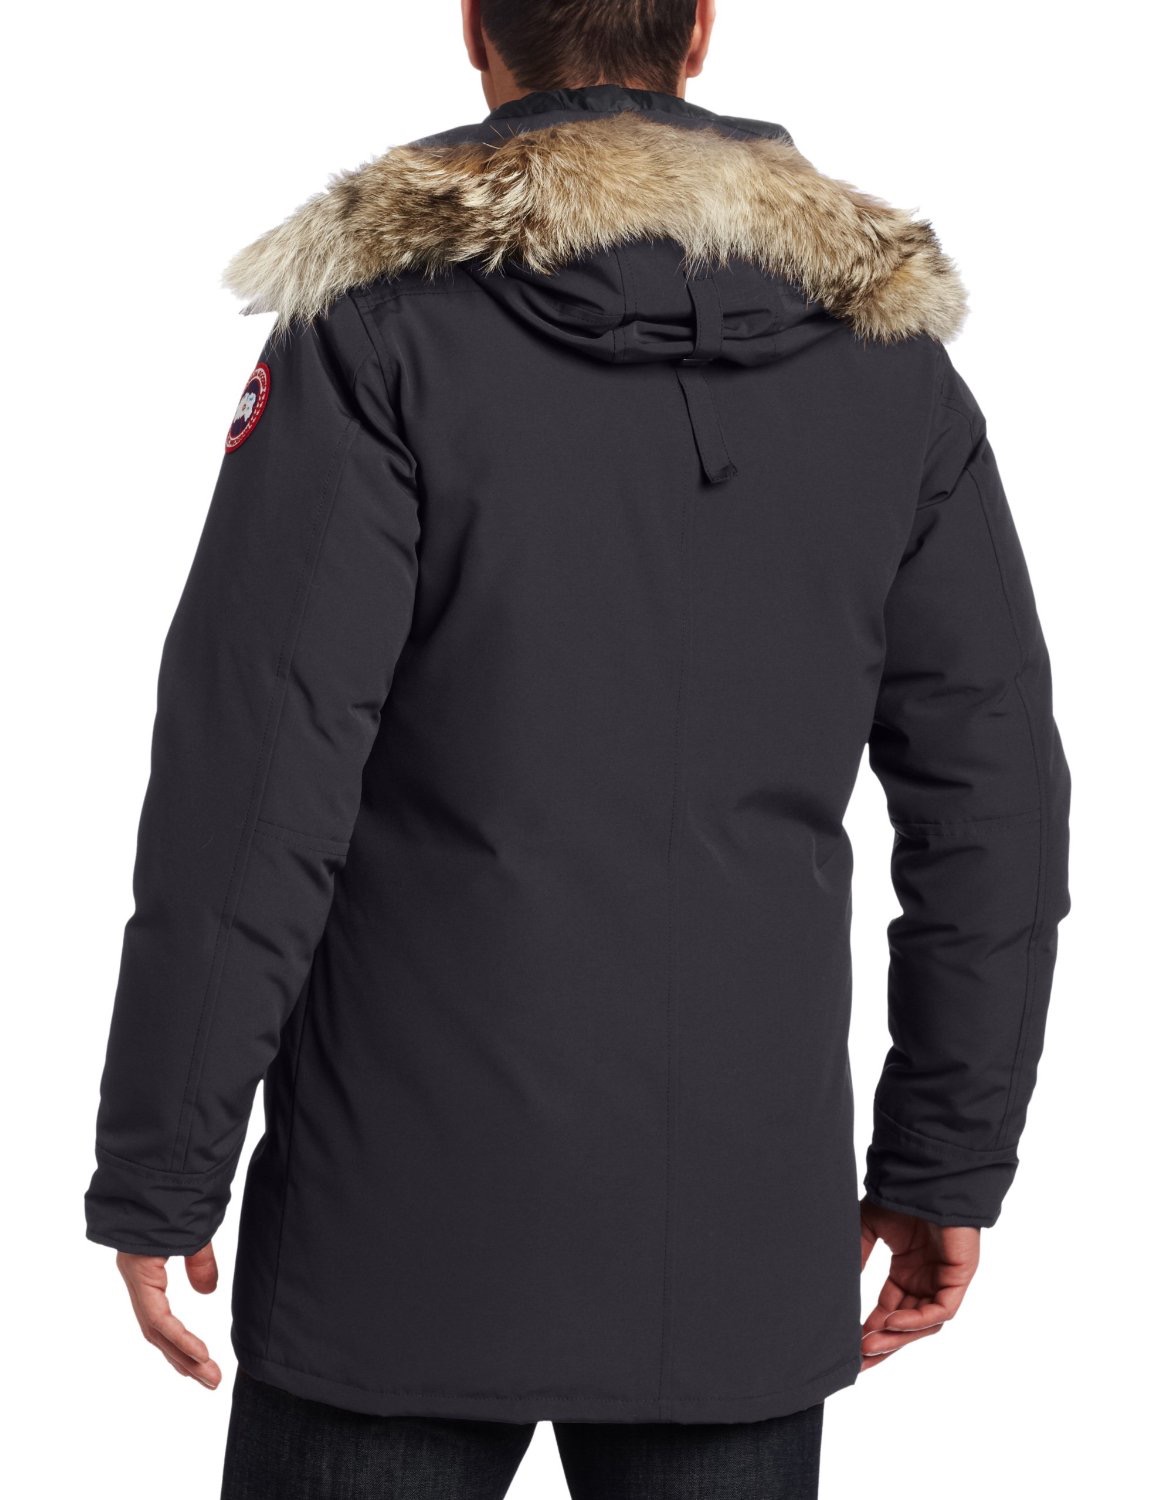 Canada Goose victoria parka replica price - My Thoughts on Fur and the Irresponsible Plague of Canada Goose ...